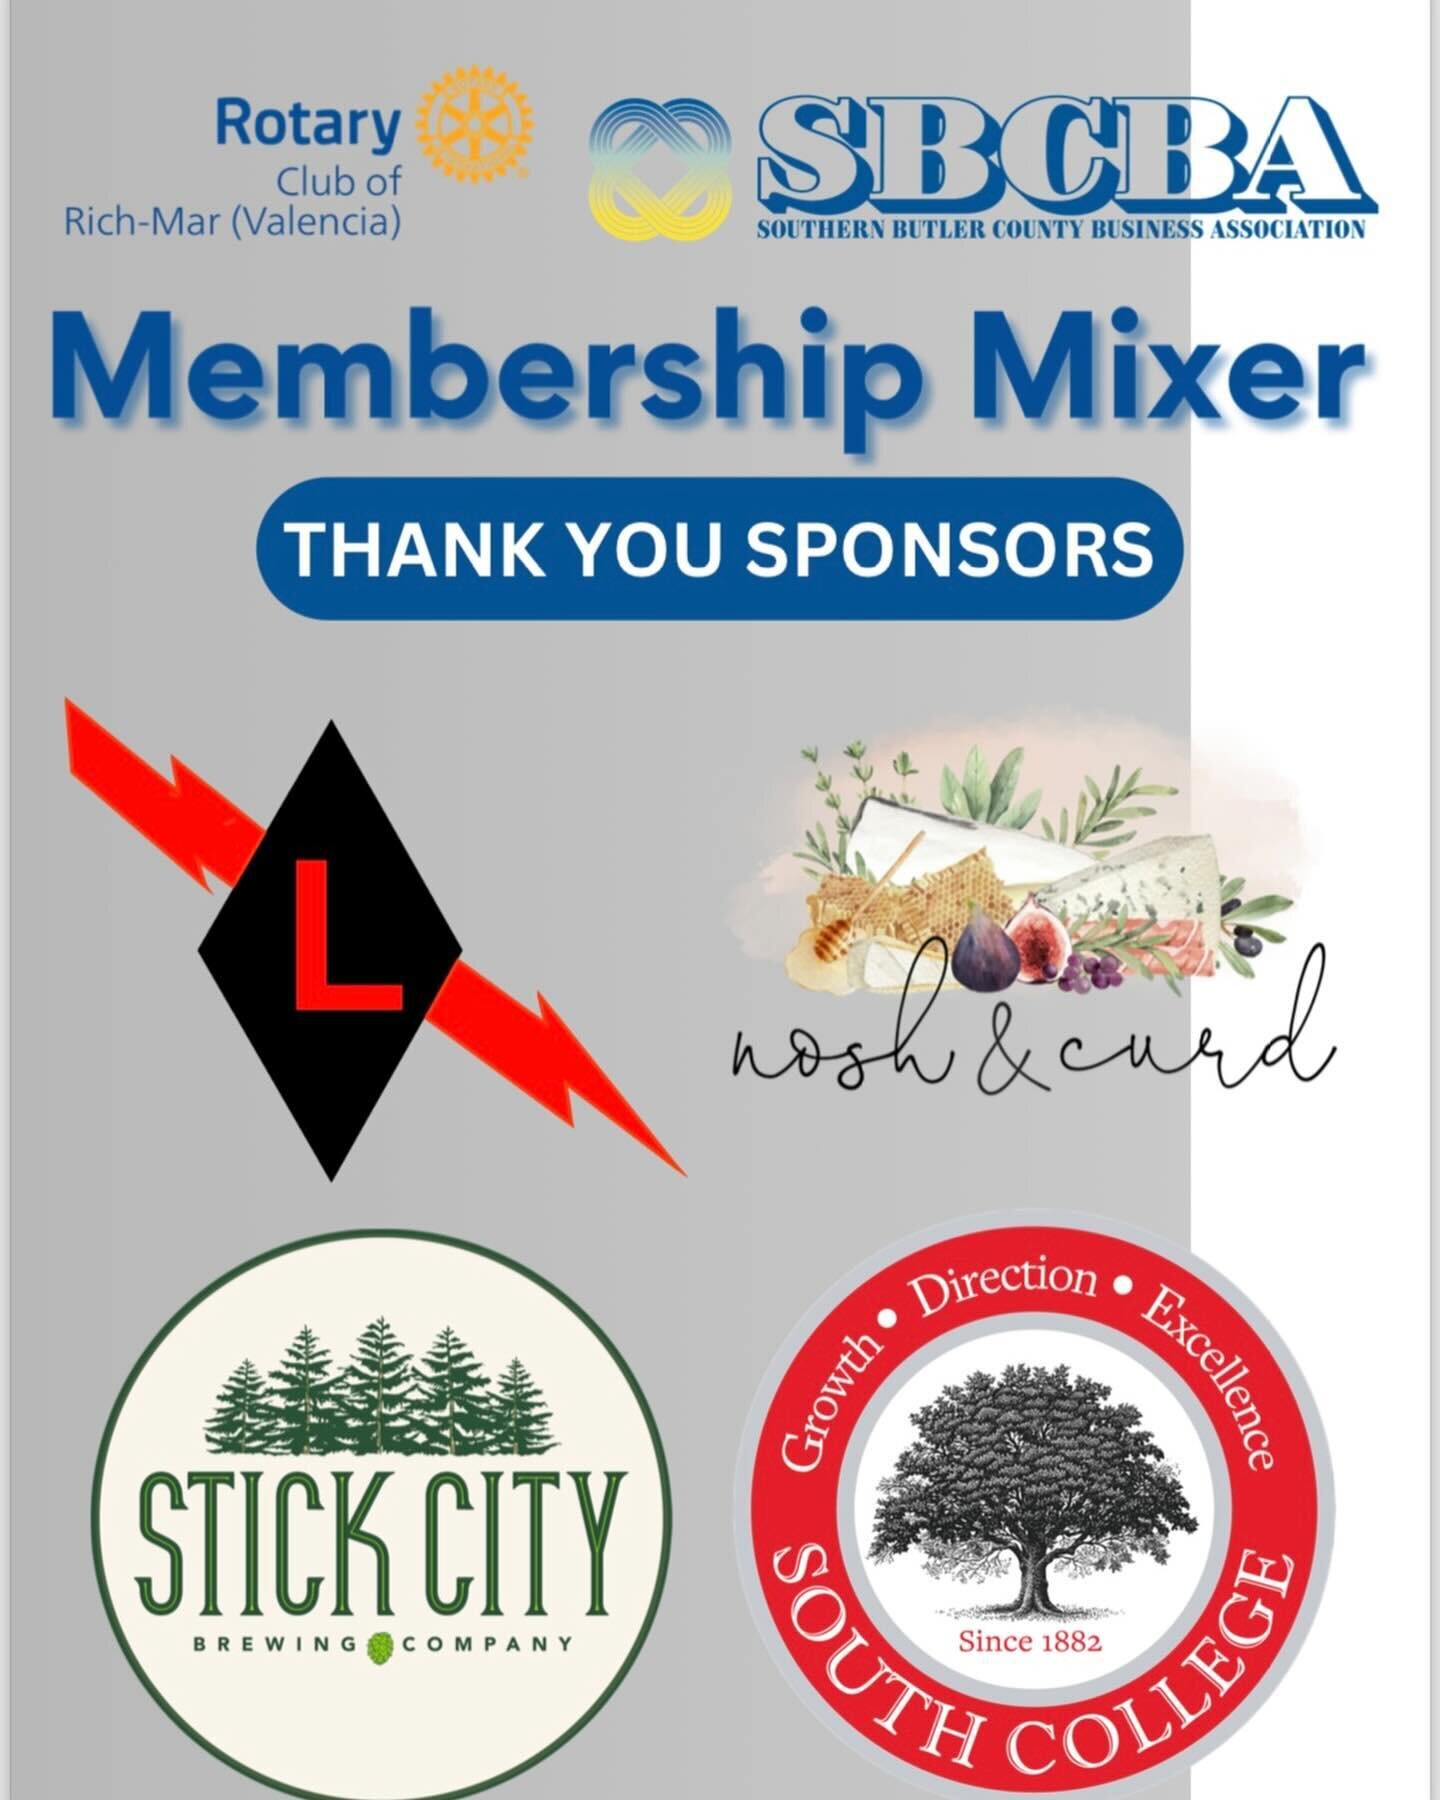 ‼️Reminder‼️ Our membership mixer with the Rich-Mar Rotary is tomorrow from 6:00 PM to 8:00 PM at Richland Municipal Center. Don&rsquo;t miss out! We&rsquo;d like to give a big shout out to all our awesome sponsors - @noshandcurd , @stickcitybeer, Le